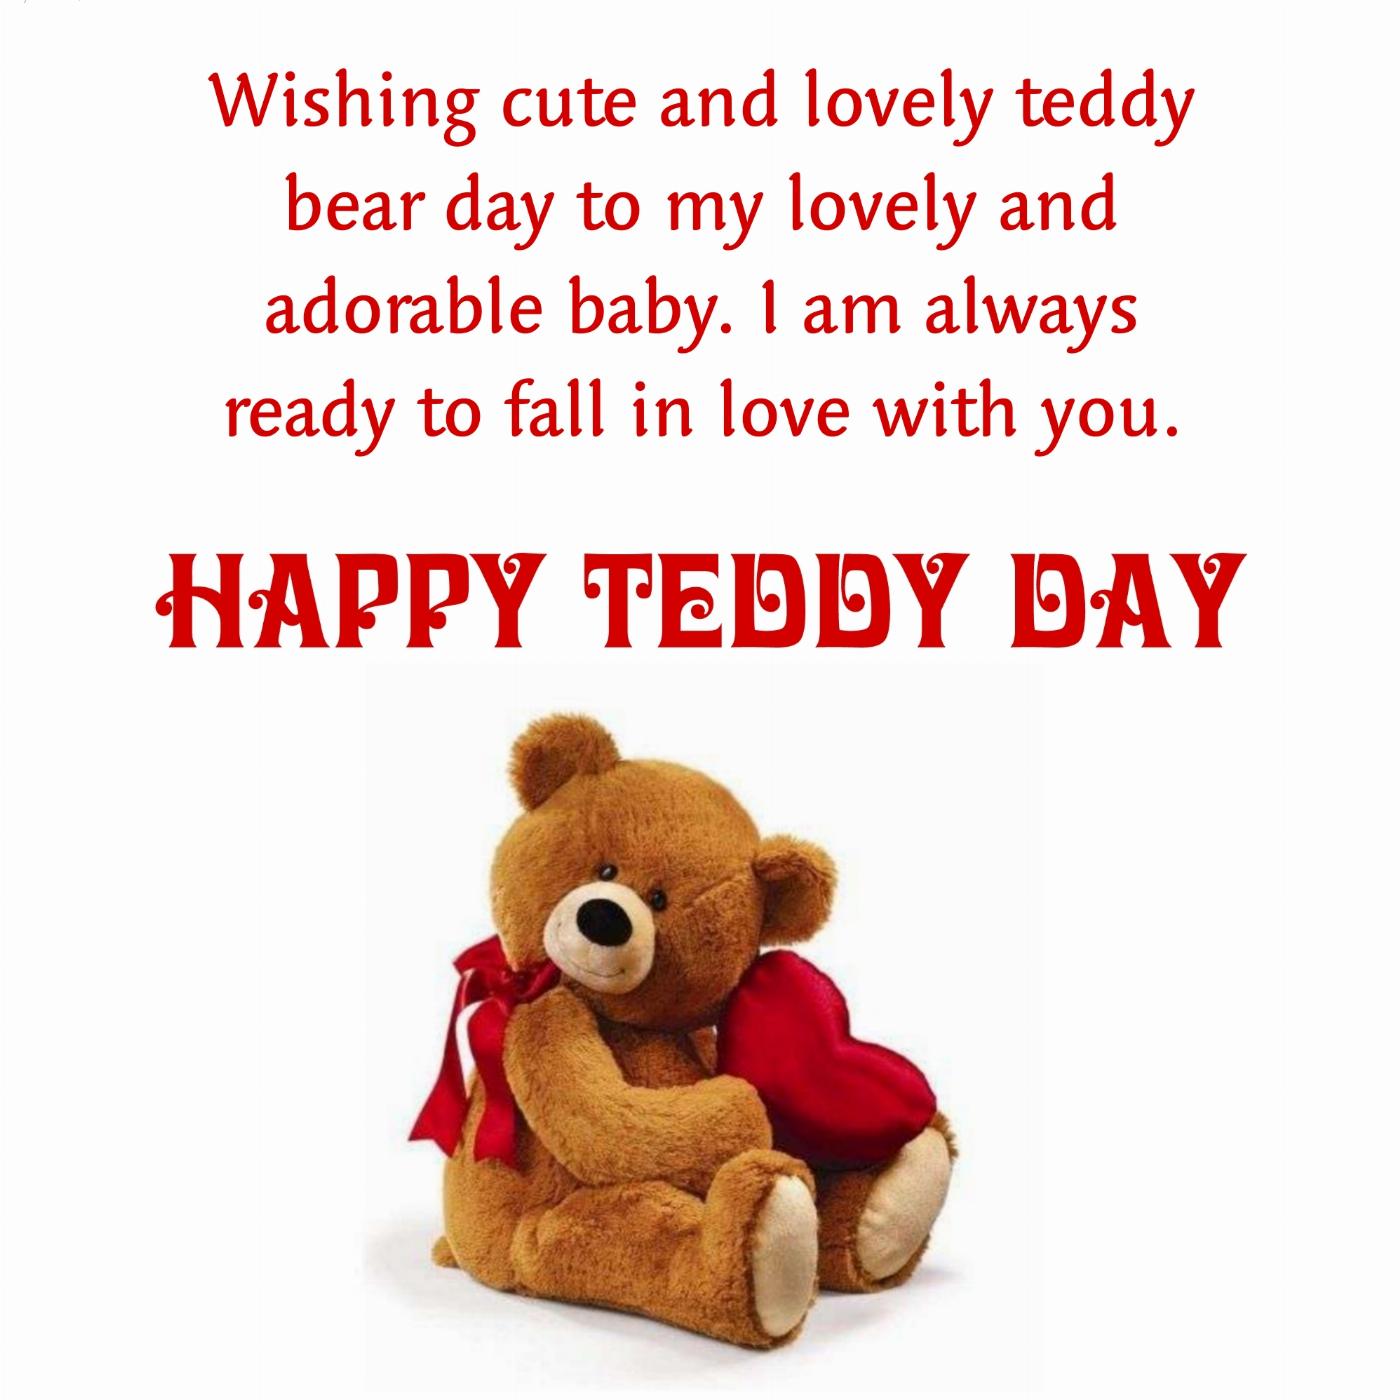 Wishing cute and lovely teddy bear day to my lovely and adorable